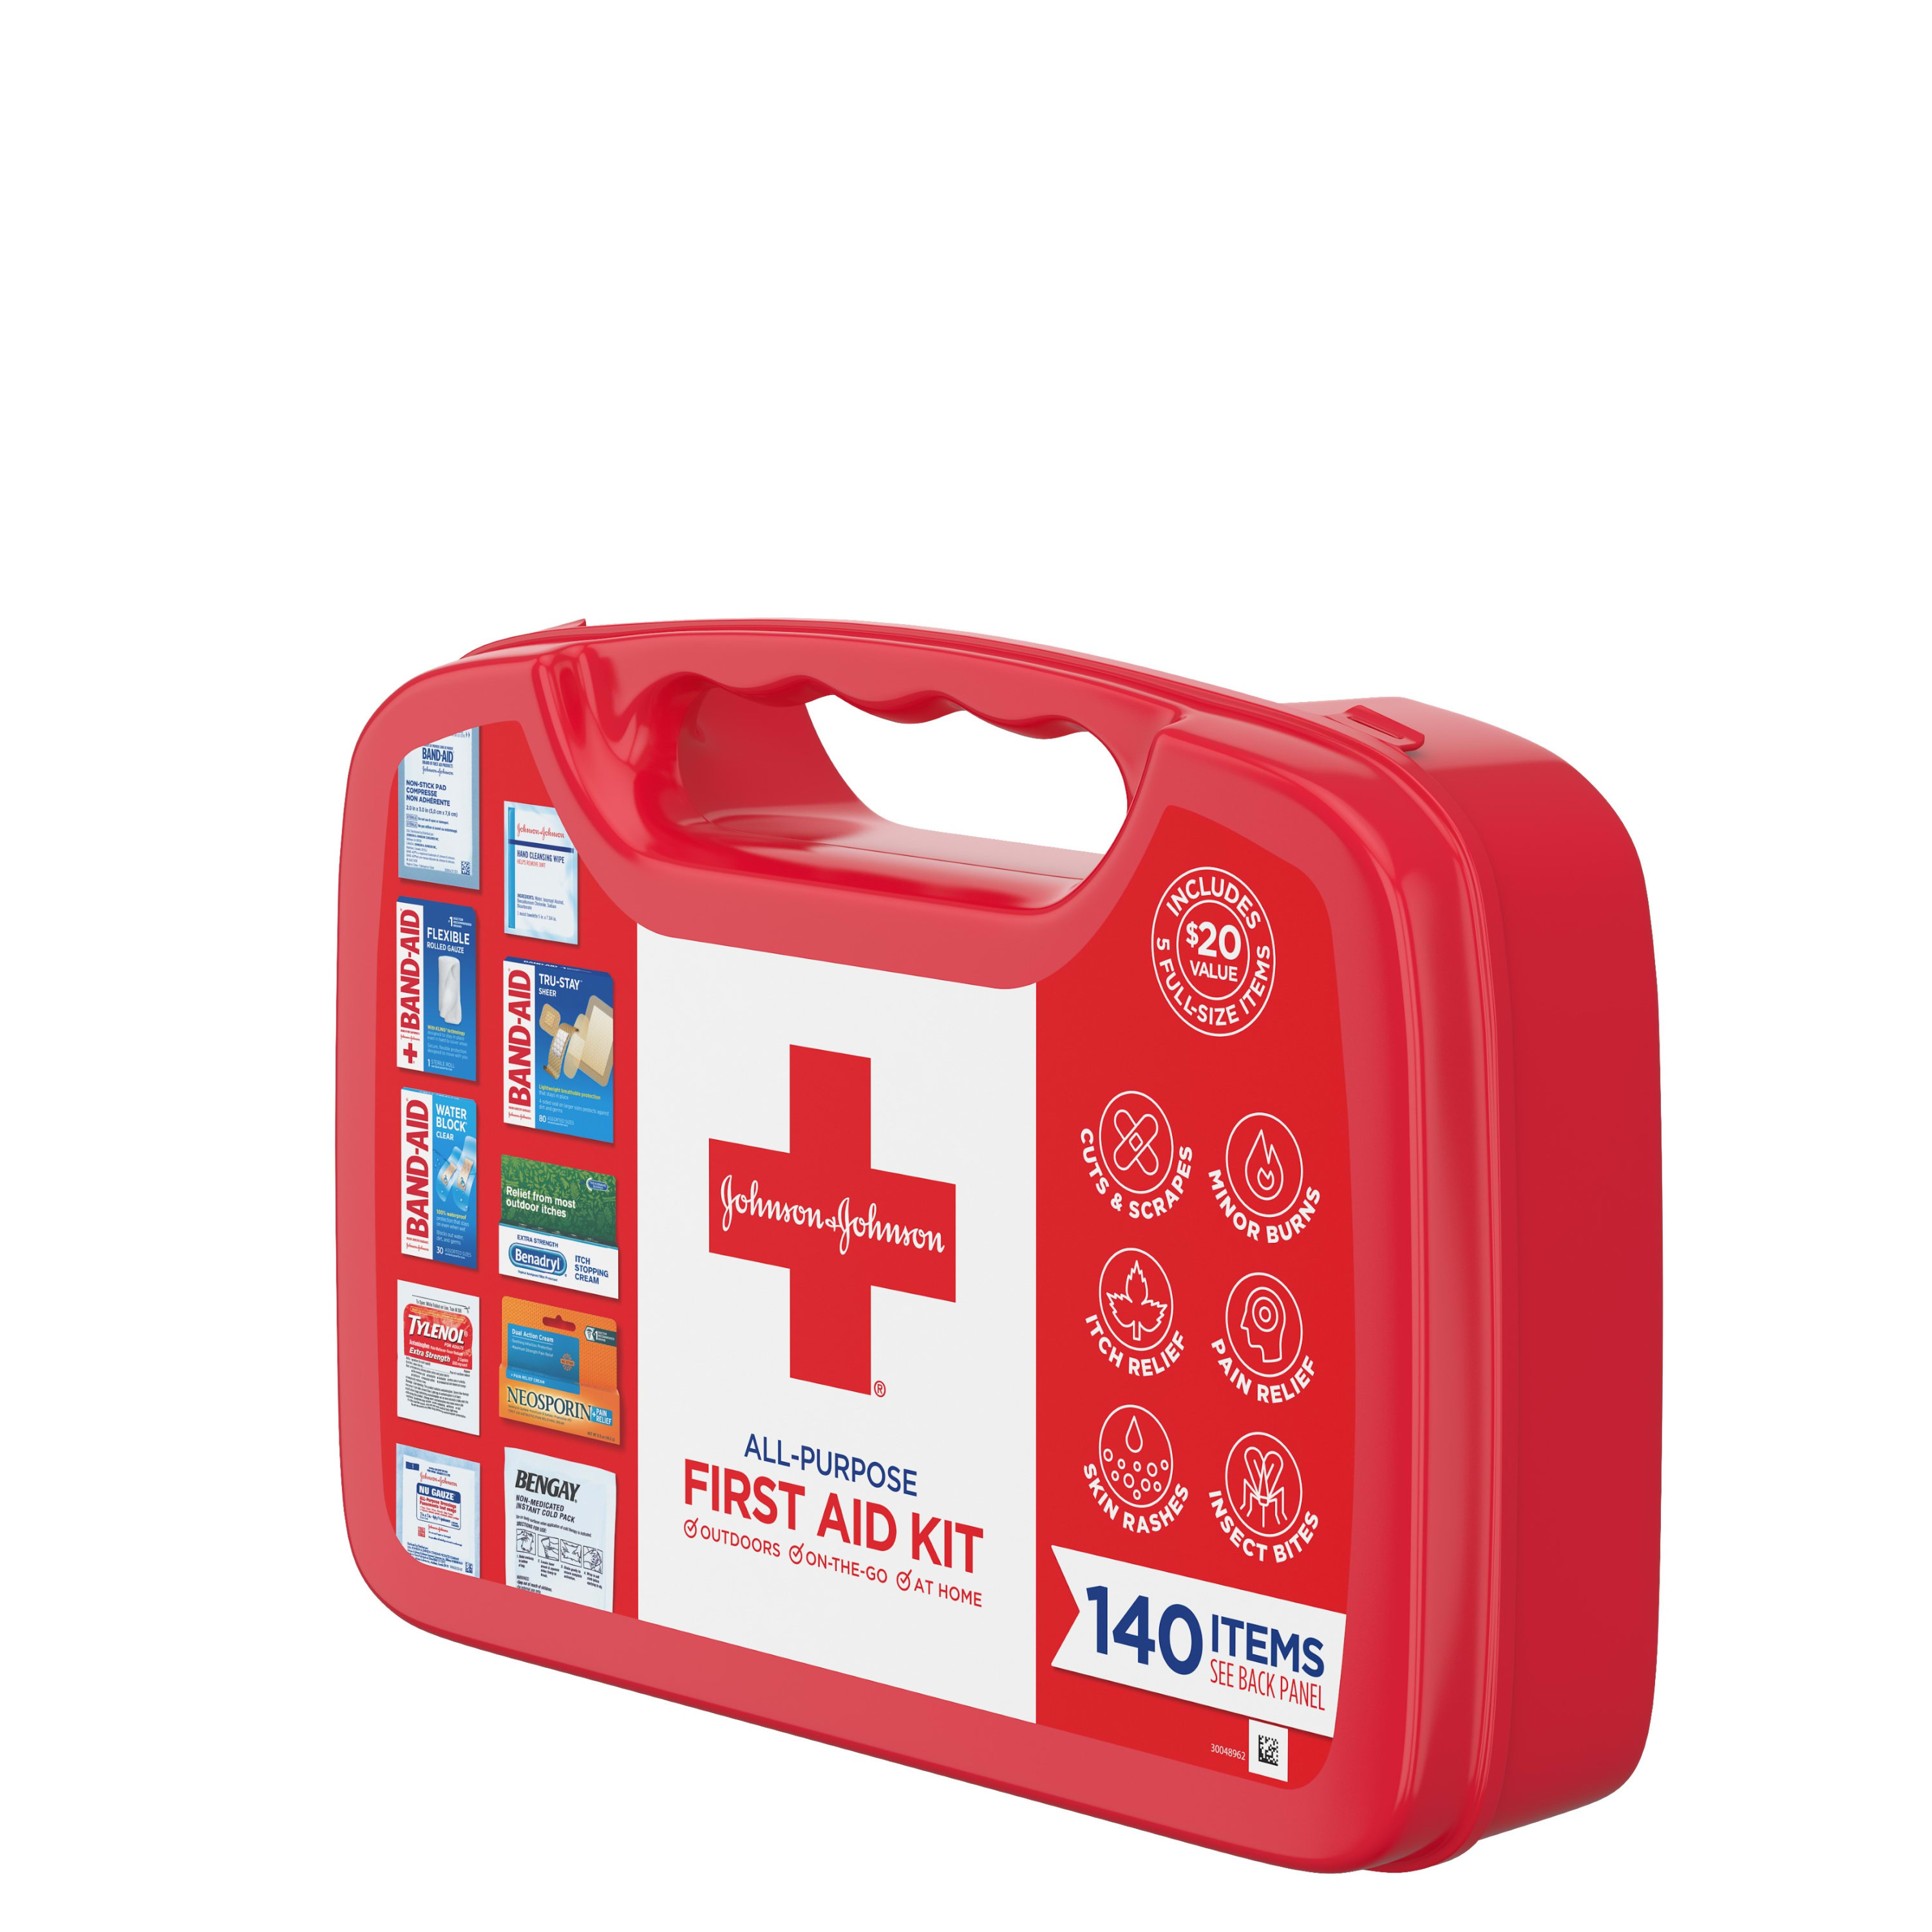 Johnson & Johnson All-Purpose Portable Compact First Aid Kit, 140 pc - image 5 of 11